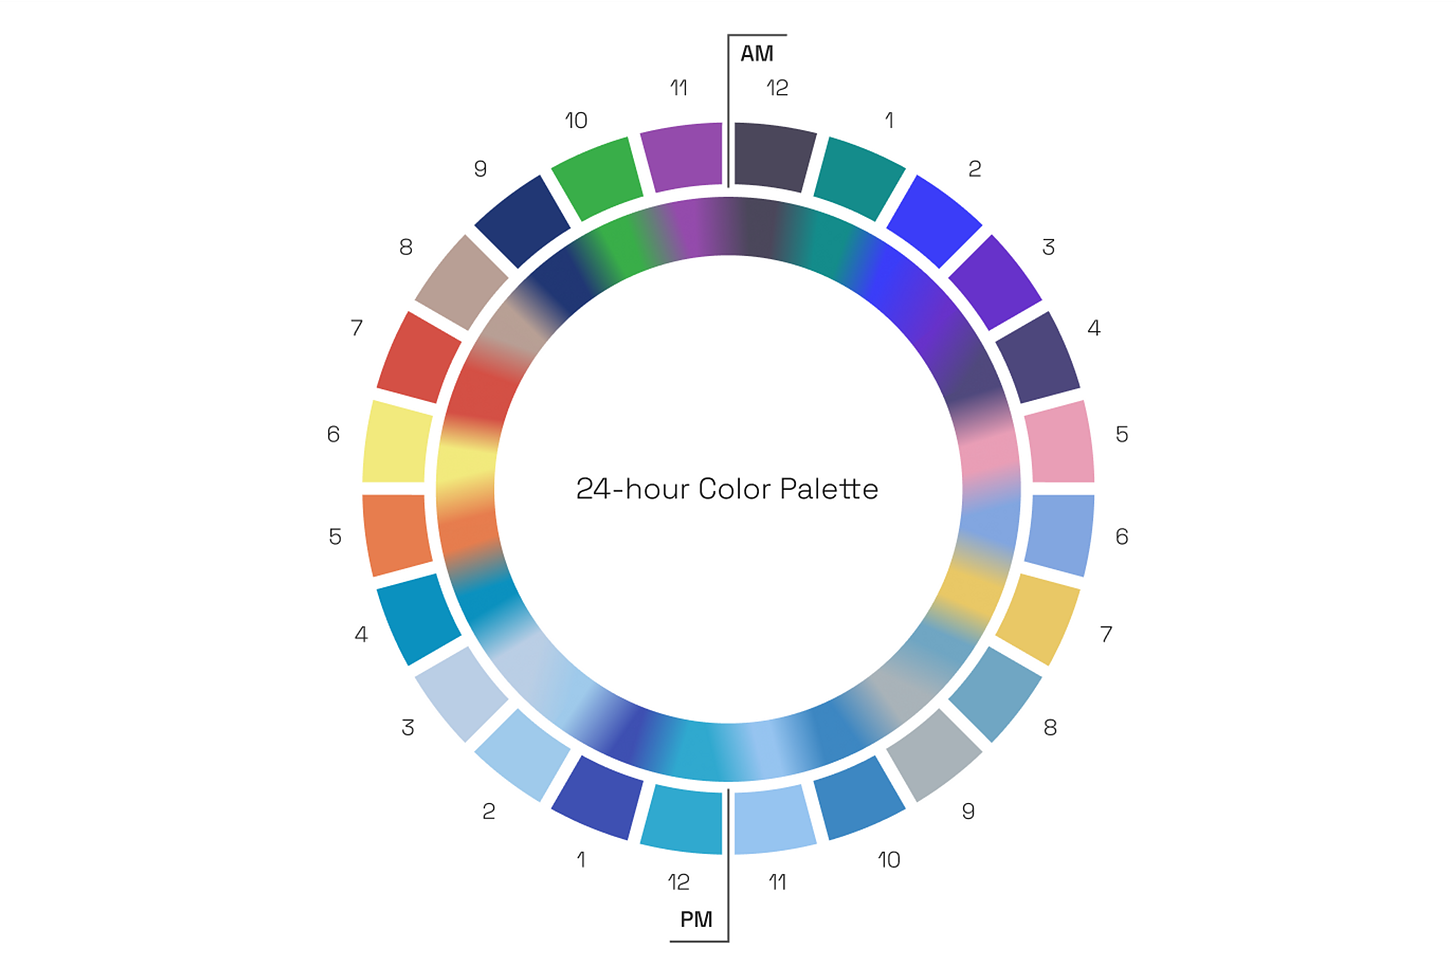 24-hour color palette as a wheel with a color for each of the 24 hours and the gradients resulting from the blending of one to the next